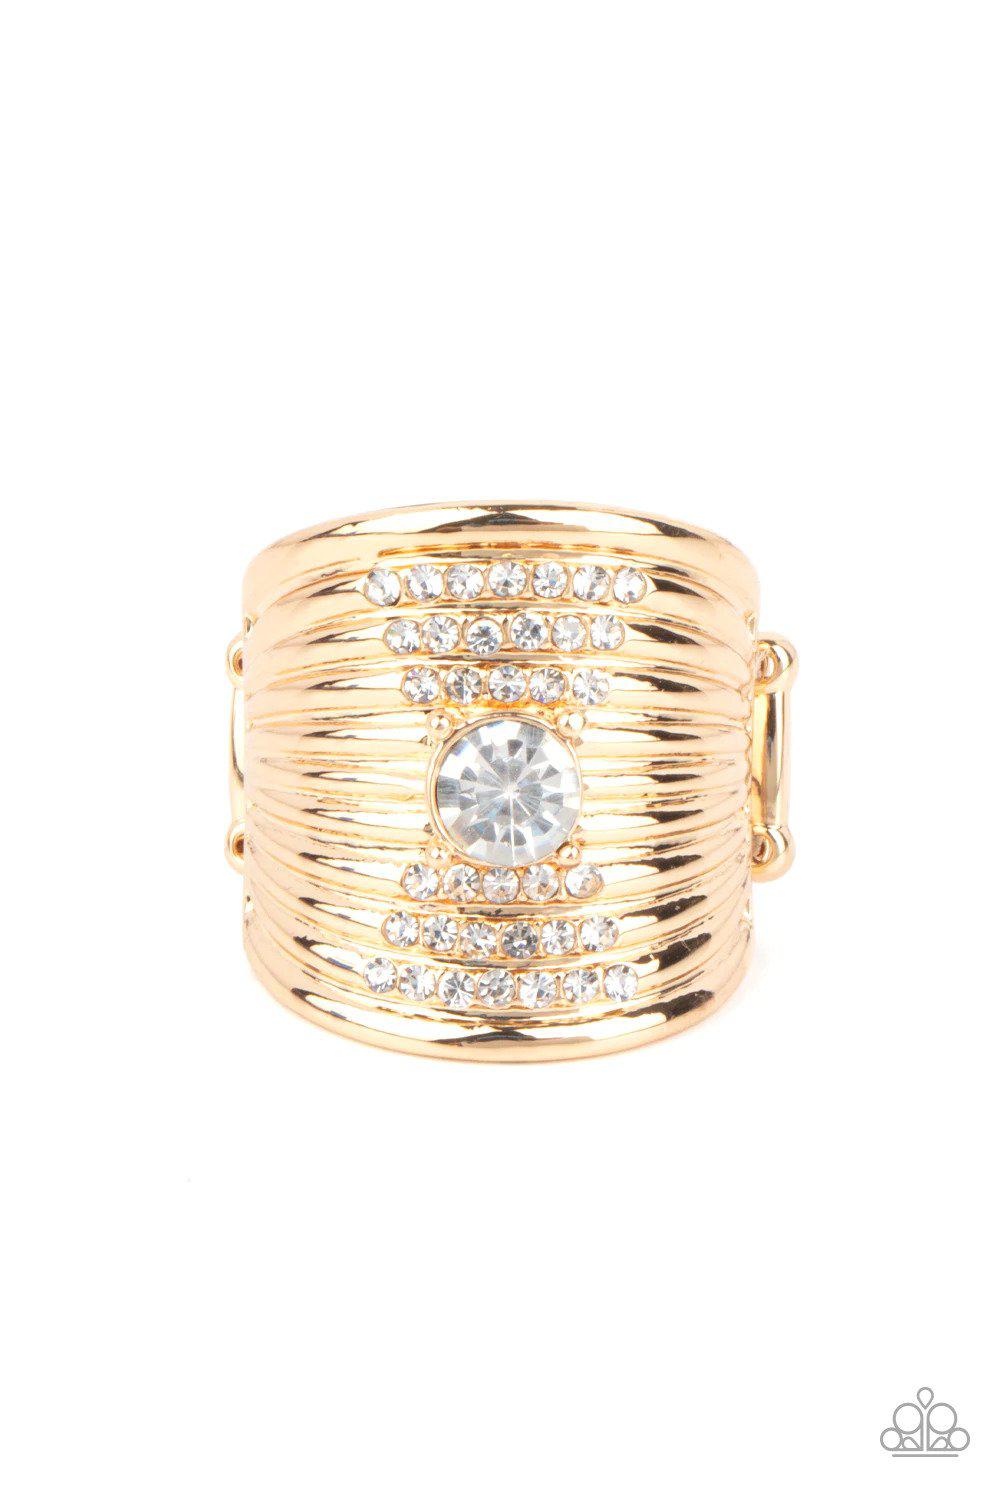 Crystal Corsets Gold Ring - Paparazzi Accessories- lightbox - CarasShop.com - $5 Jewelry by Cara Jewels